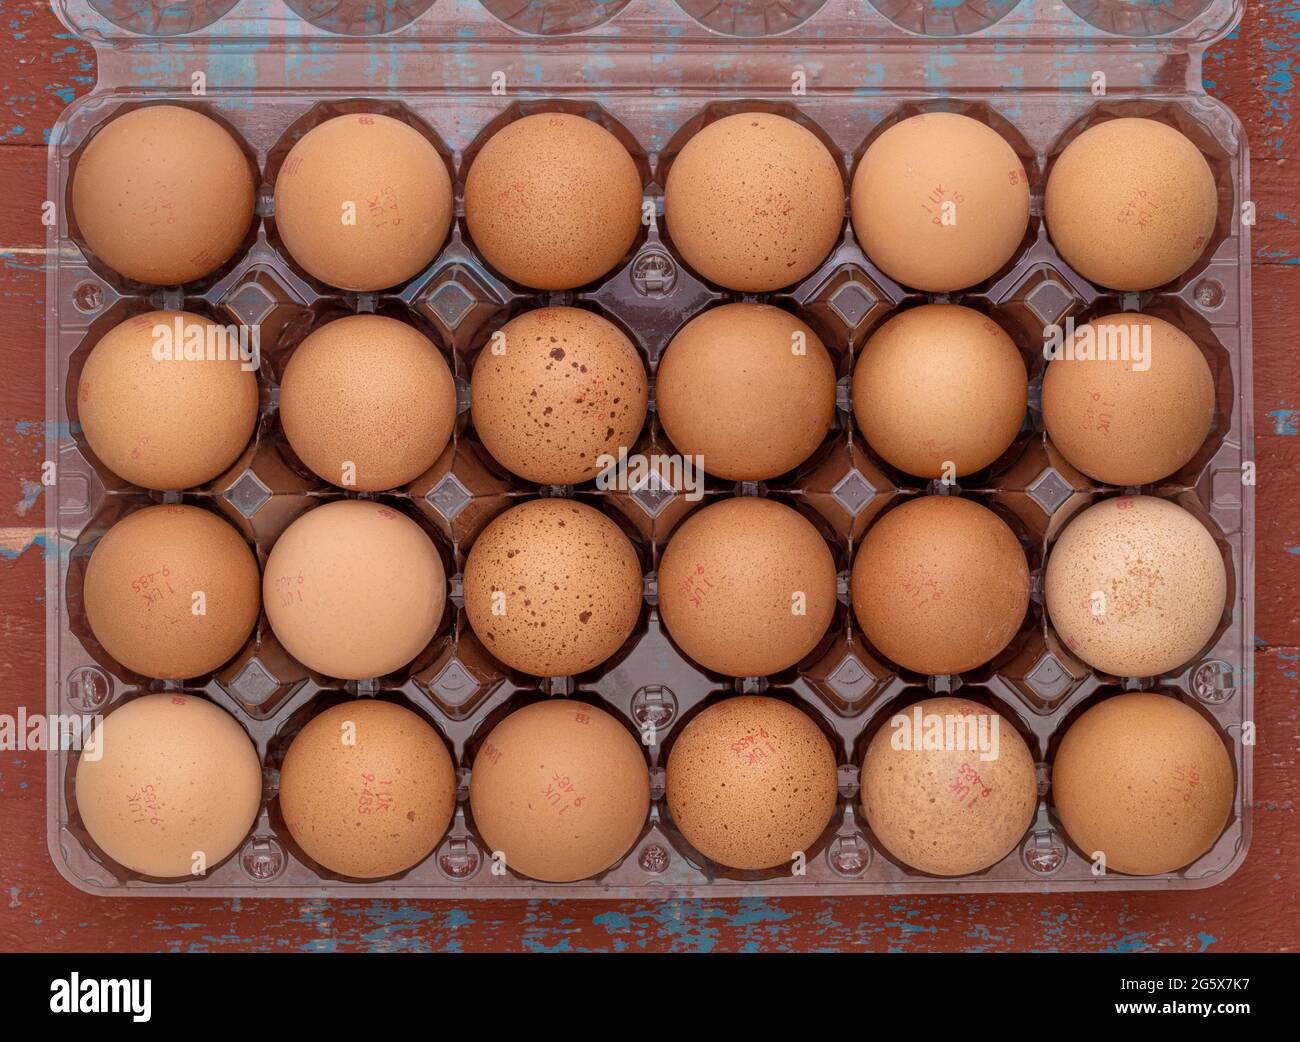 Plan view of of 24 brown eggs in a clear plastic carton on a brown and blue wooden, rustic background. Stock Photo